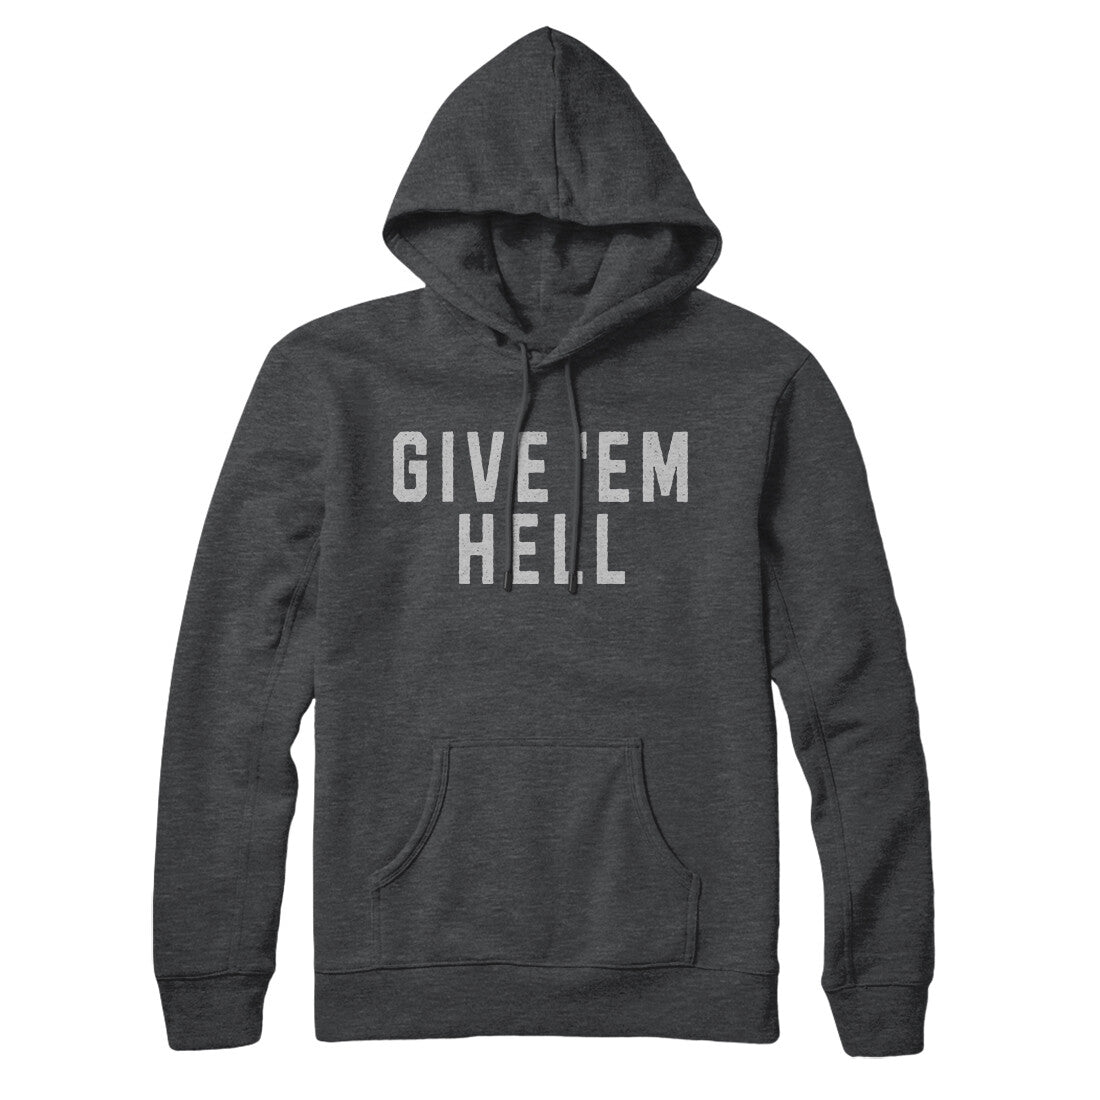 Give ‘em Hell in Charcoal Heather Color